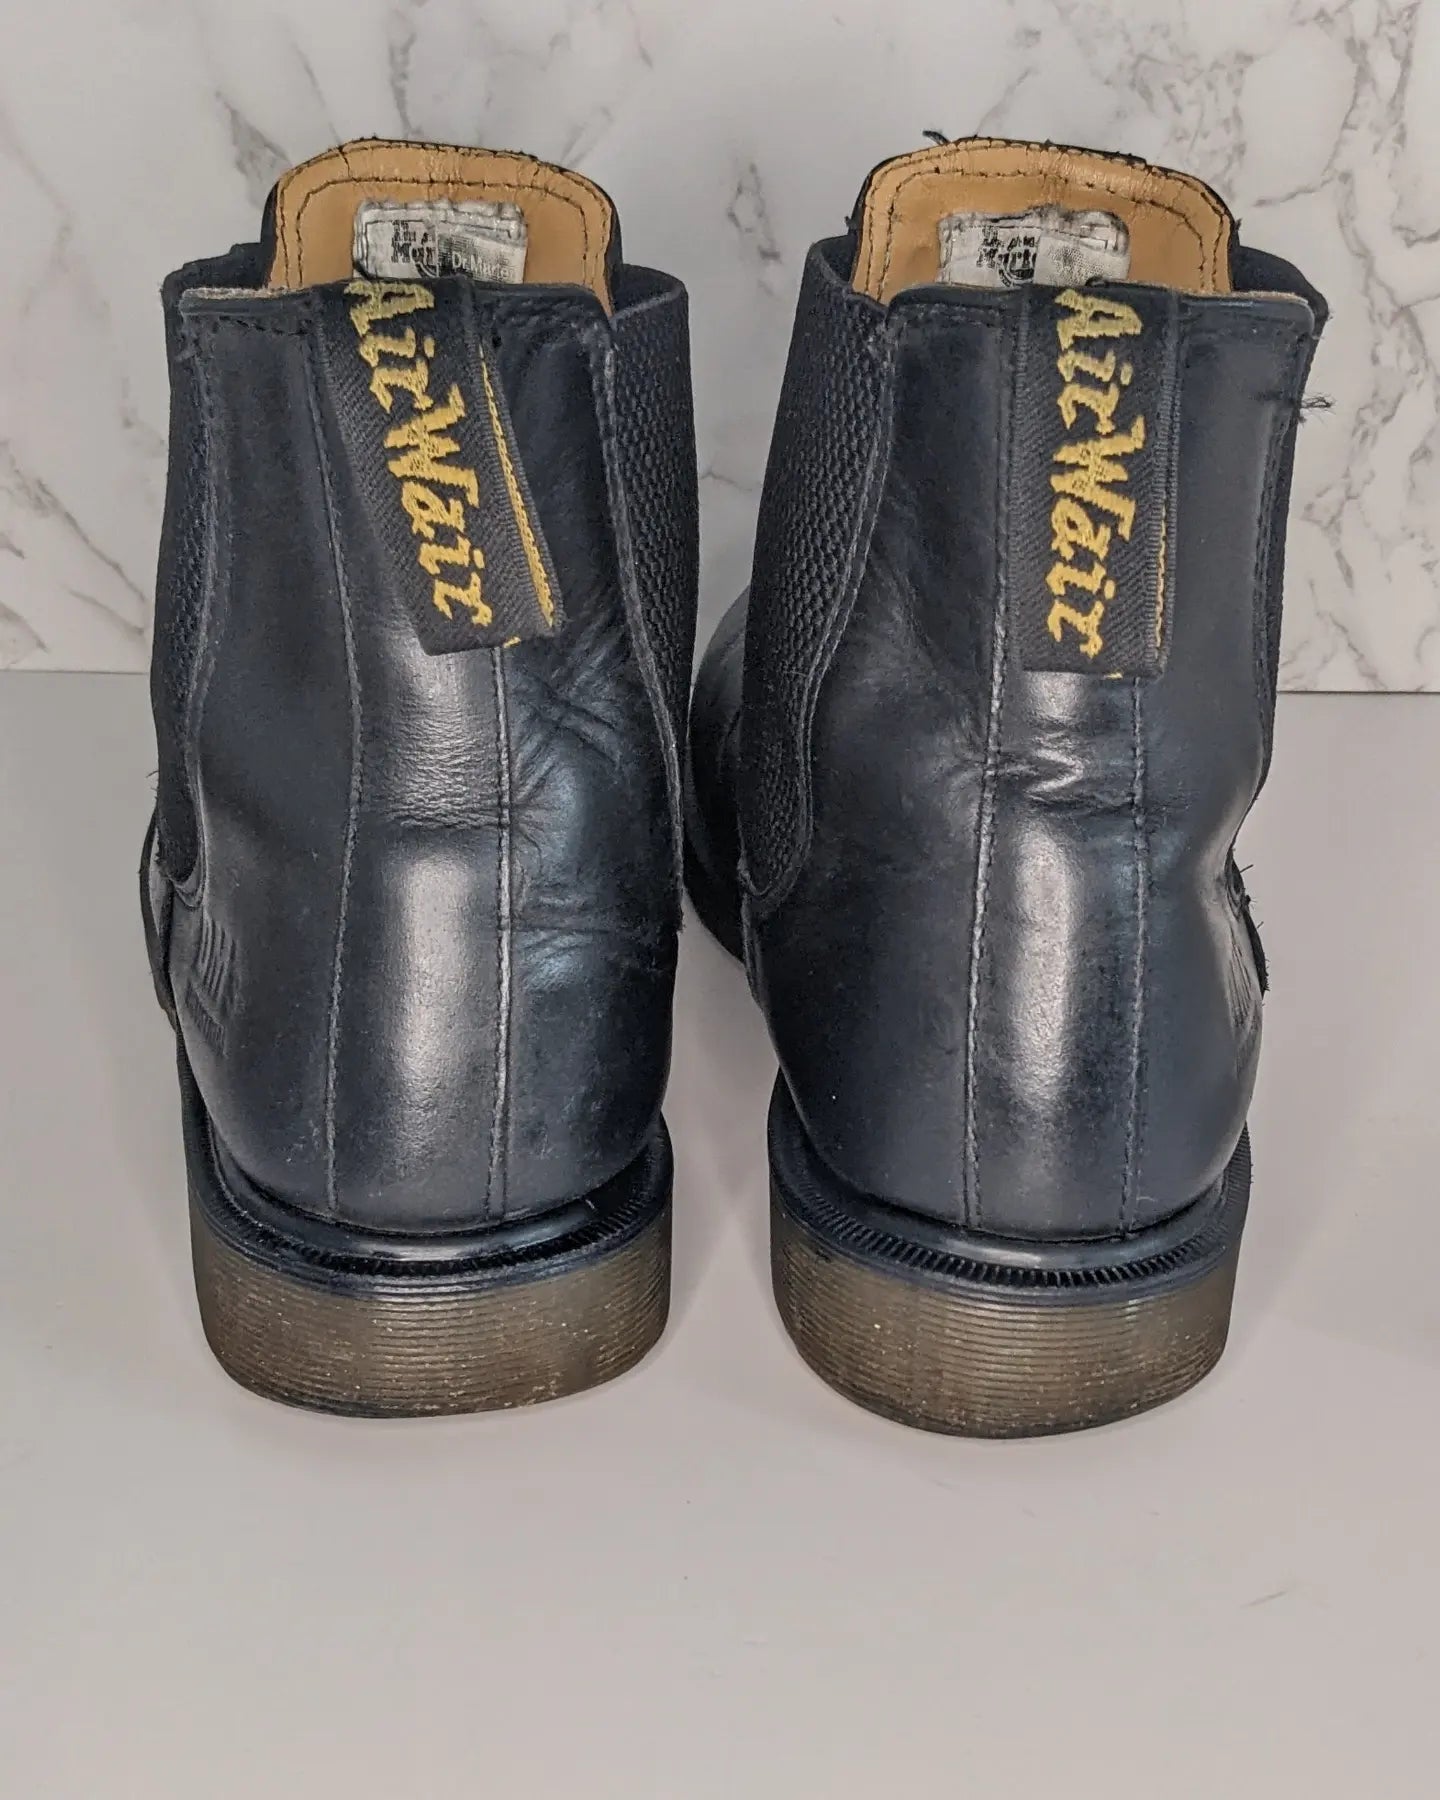 Dr. Martens Industrial Smooth Leather Chelsea Boot Black US Size 11